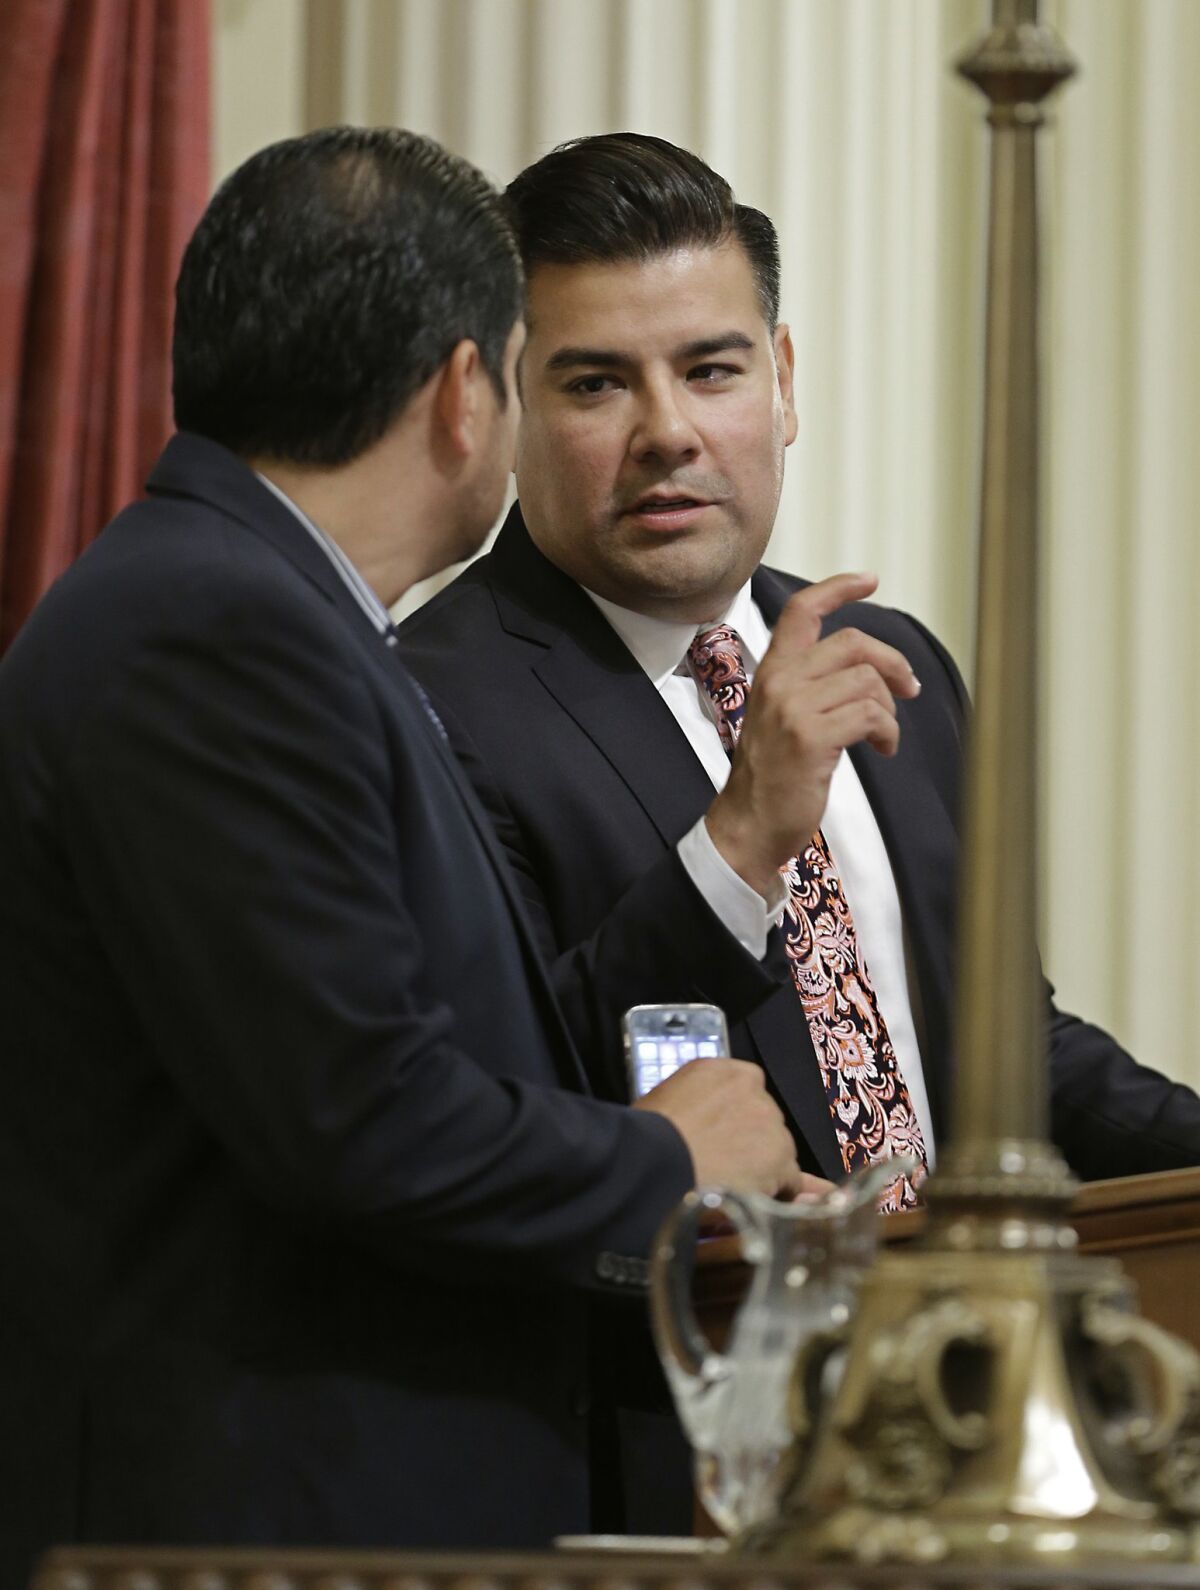 State Insurance Commissioner Ricardo Lara, right, talks with Sen. Ben Hueso, D- San Diego, during a 2015 debate. Lara, a former Democratic state senator from Bell Gardens, intervened in four proceedings before the Department of Insurance after receiving political donations from insurance executives and their spouses.